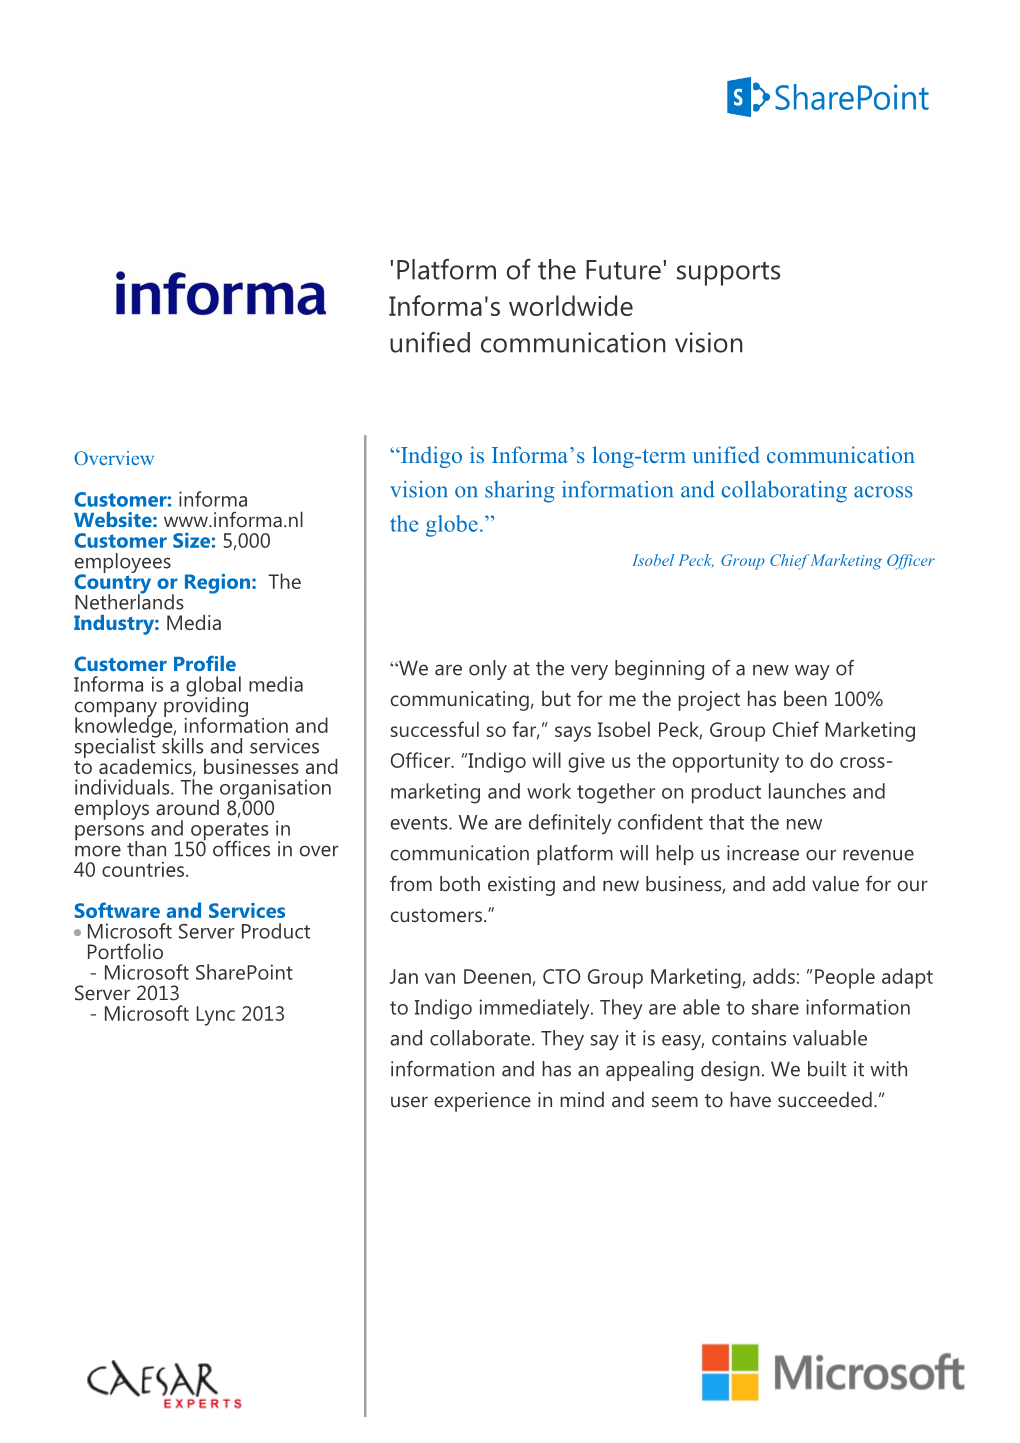 'Platform of the Future' Supports Informa's Worldwide Unified Communication Vision